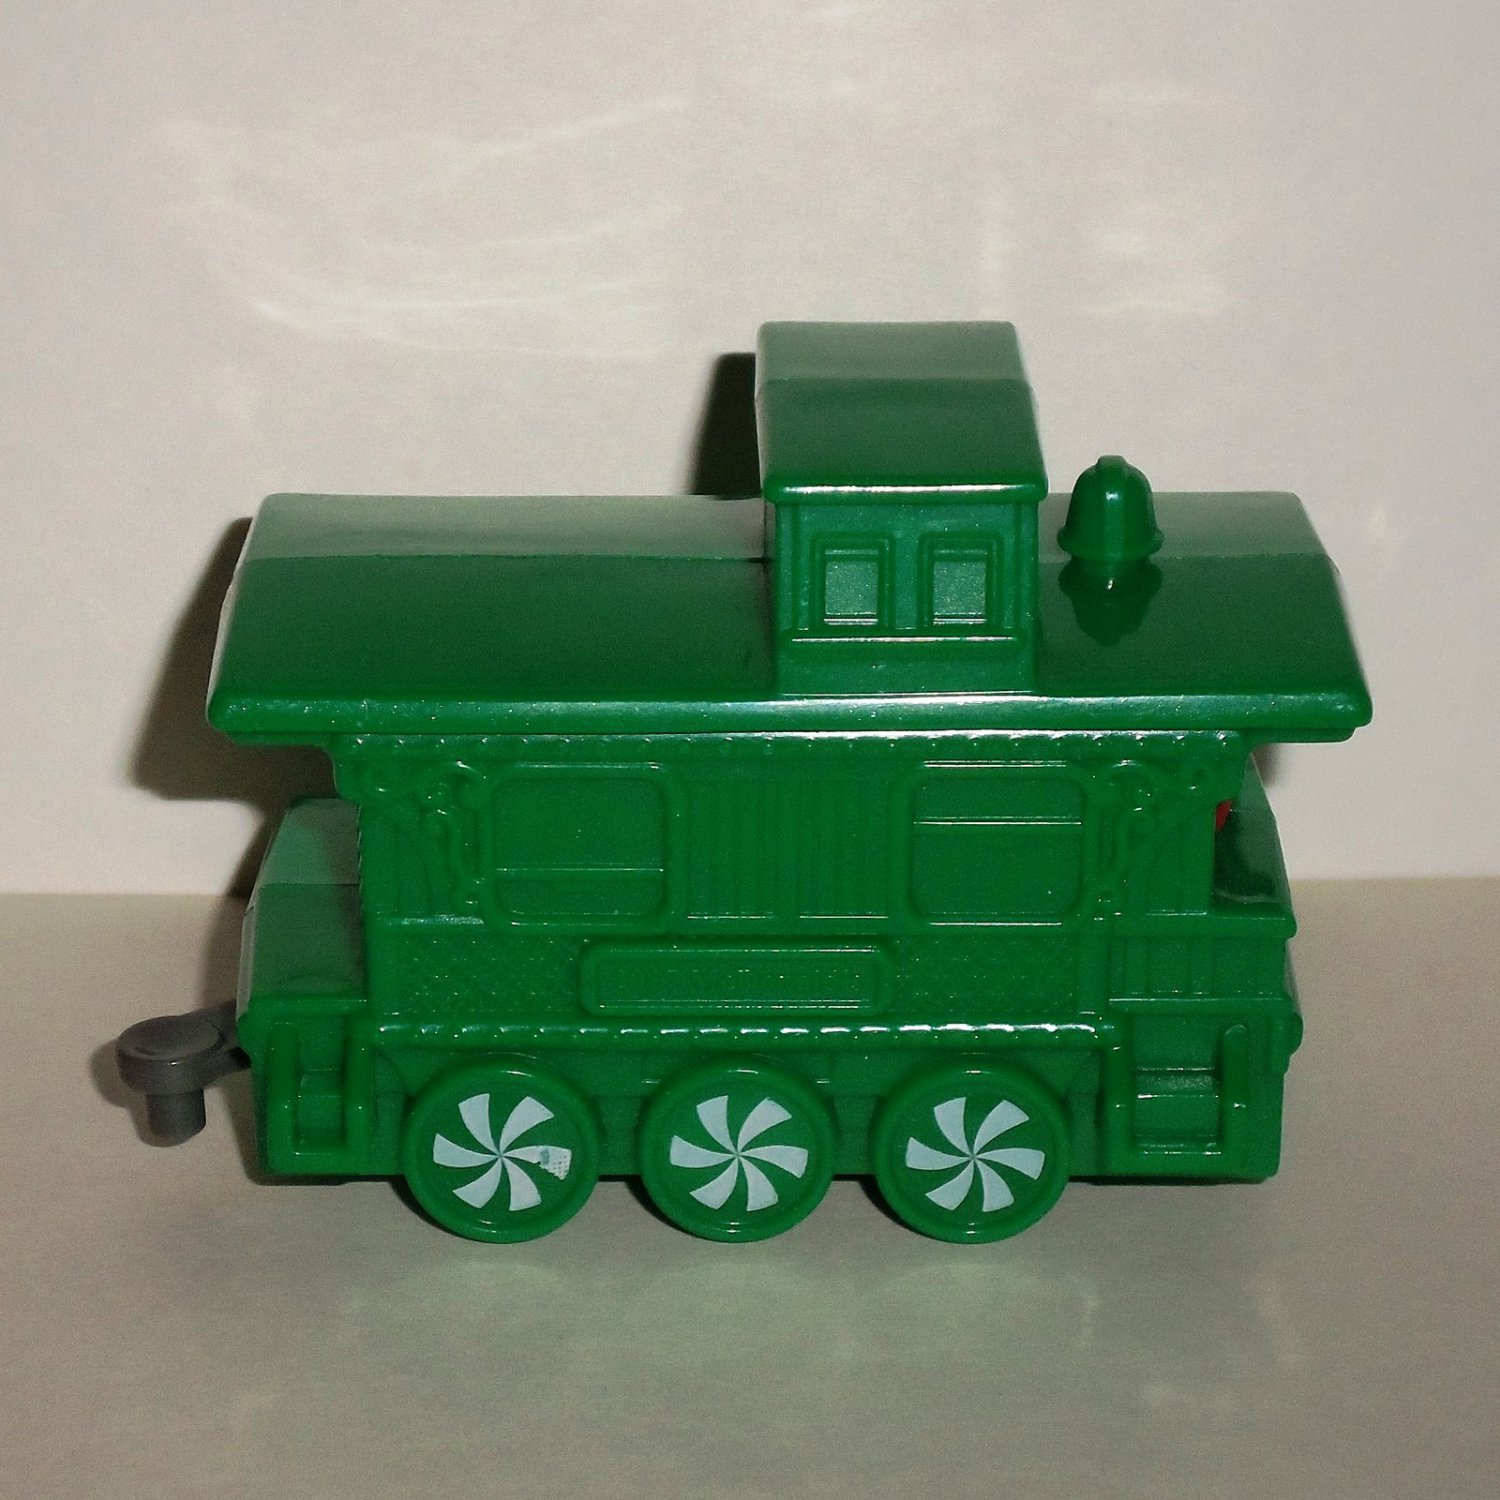 McDonalds happy meal toy Christmas Express Train 2017 Caboose 